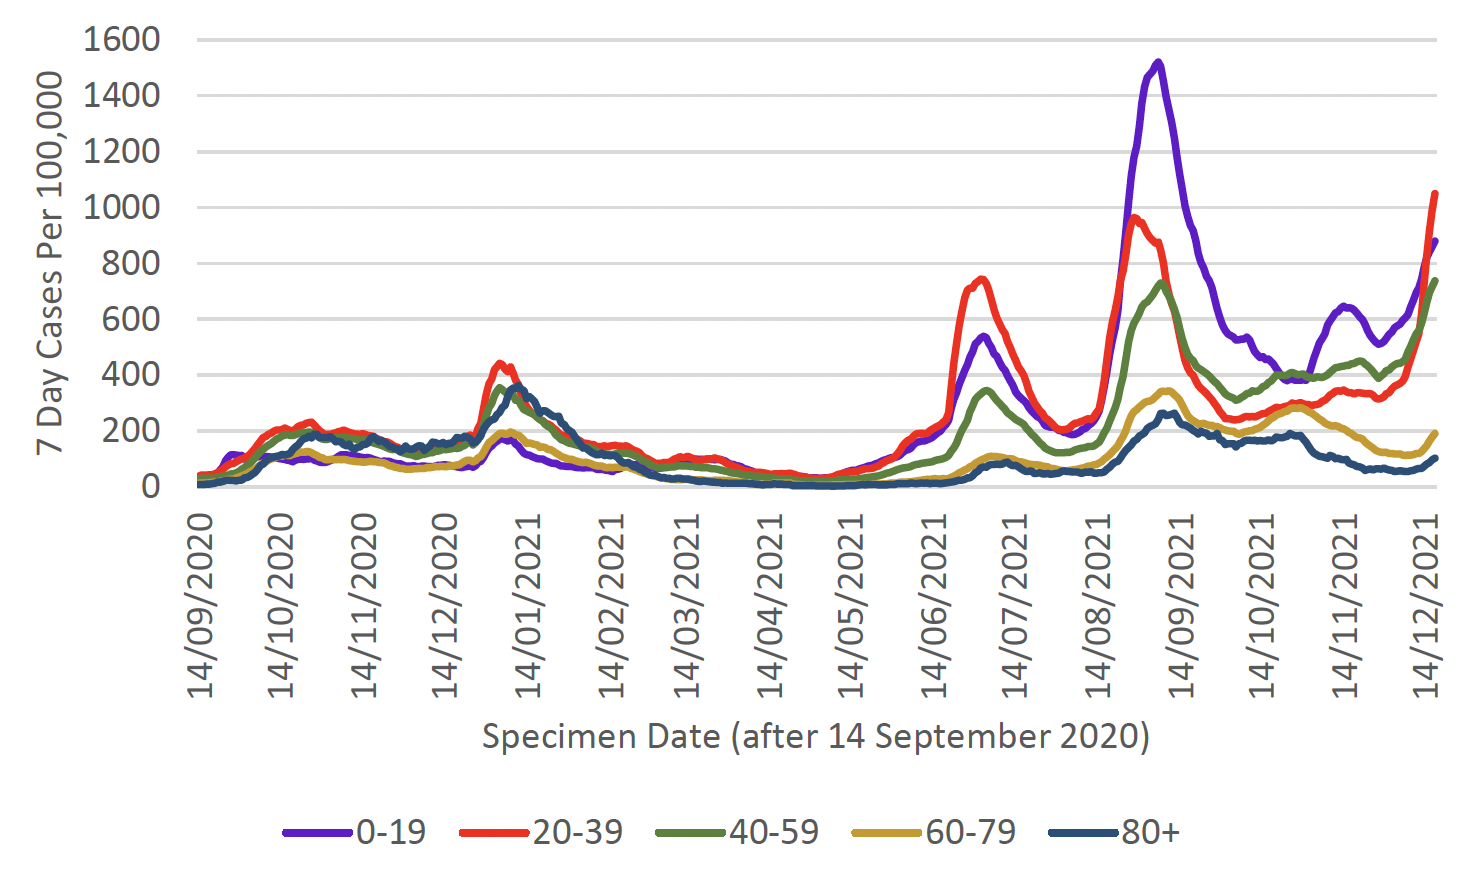 This line graph shows weekly cases per 100,000 people for five different age bands over time, from mid-September 2020. Each age band shows a similar trend with a peak in cases in January 2021, with the 20 to 39 age band having the highest case rate, and the under 20 age band having the lowest case rate. Case rates reduced in all age groups from this peak and then started to increase again sharply from mid-May, reaching a peak at the beginning of July 2021. 7 day case rates per 100,000 population then decreased sharply followed by a sharp increase in cases in mid-August 2021. In September case rates decreased, and fluctuated throughout October and early November. Since late November, case rates have increased in all age bands, with the sharpest increase seen in those aged under 60. 